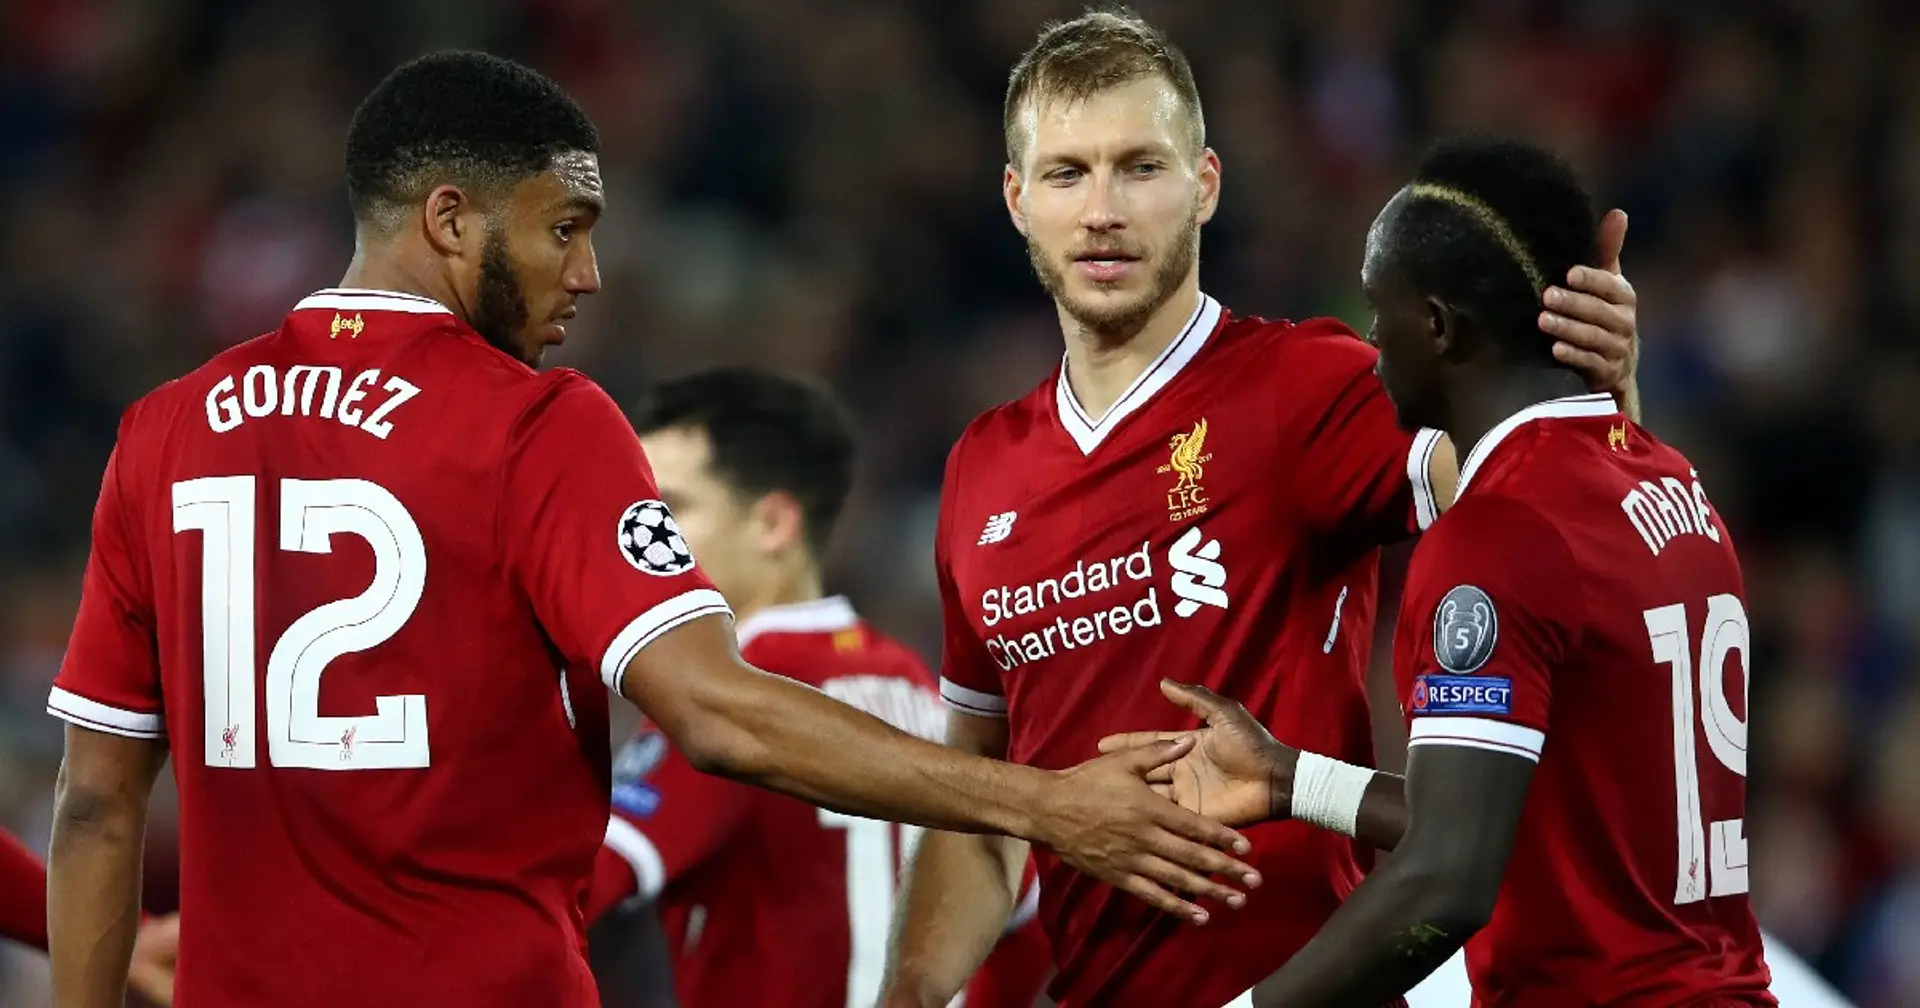 'He was really, really on fire': Klavan names best Liverpool player during his time at the club